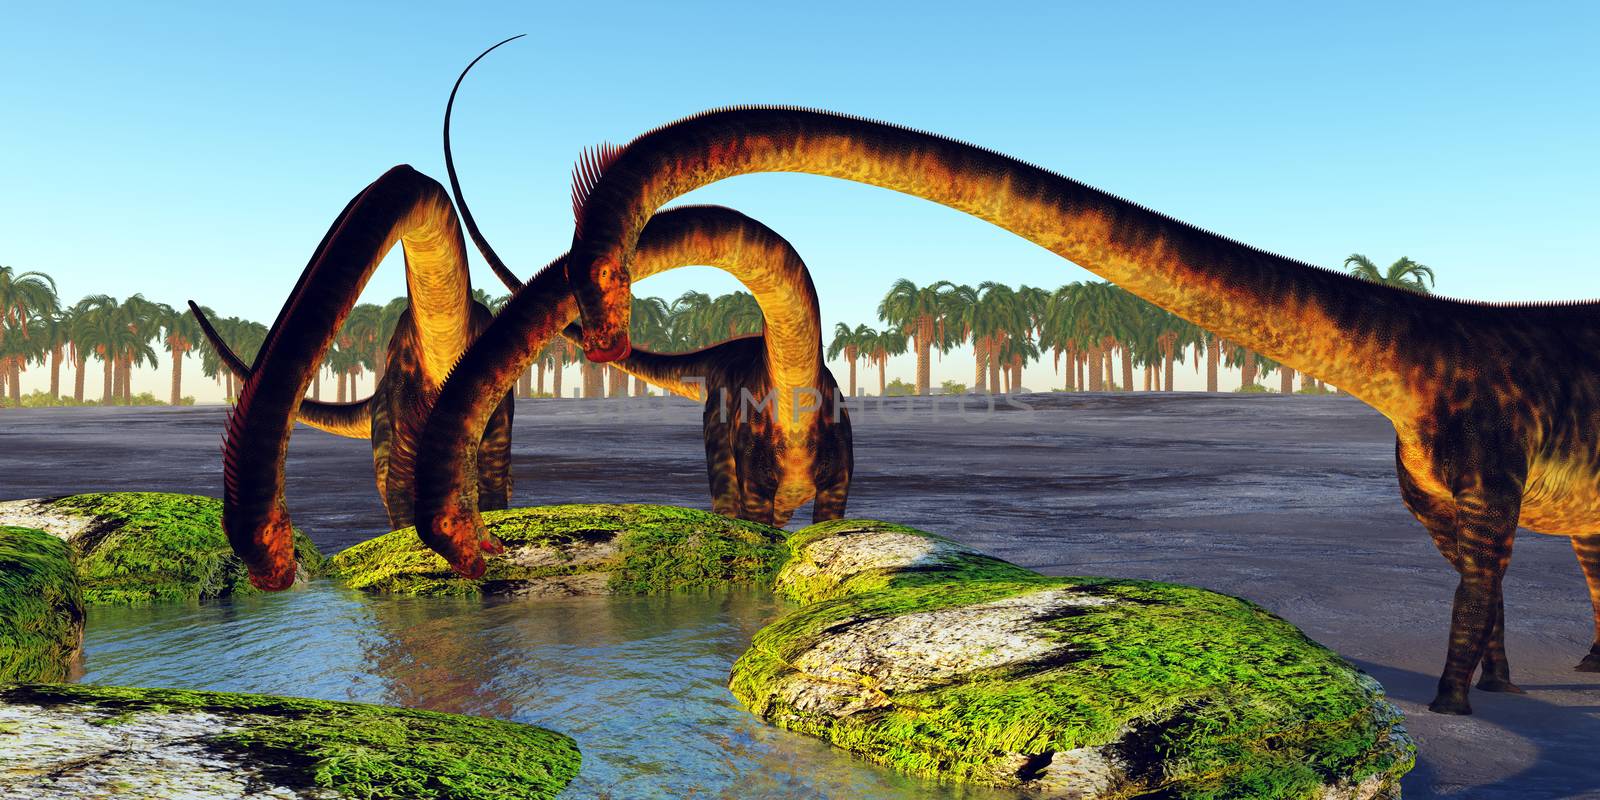 A herd of Barosaurus dinosaurs find a luscious water spring to quench their thirst during the Jurassic Period.